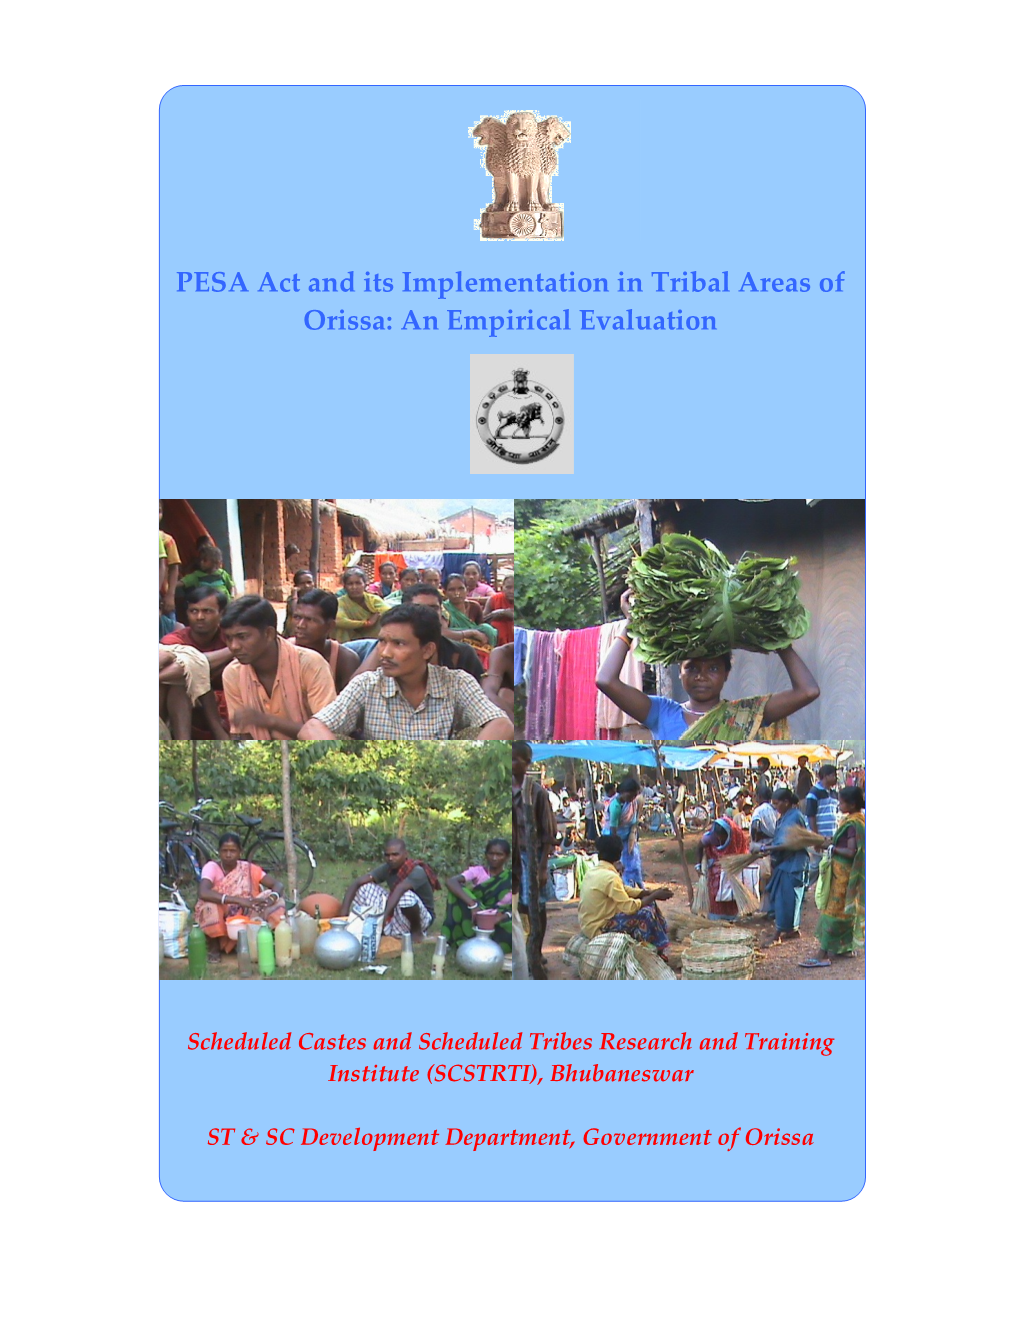 PESA Act and Its Implementation in Tribal Areas of Orissa: an Empirical Evaluation